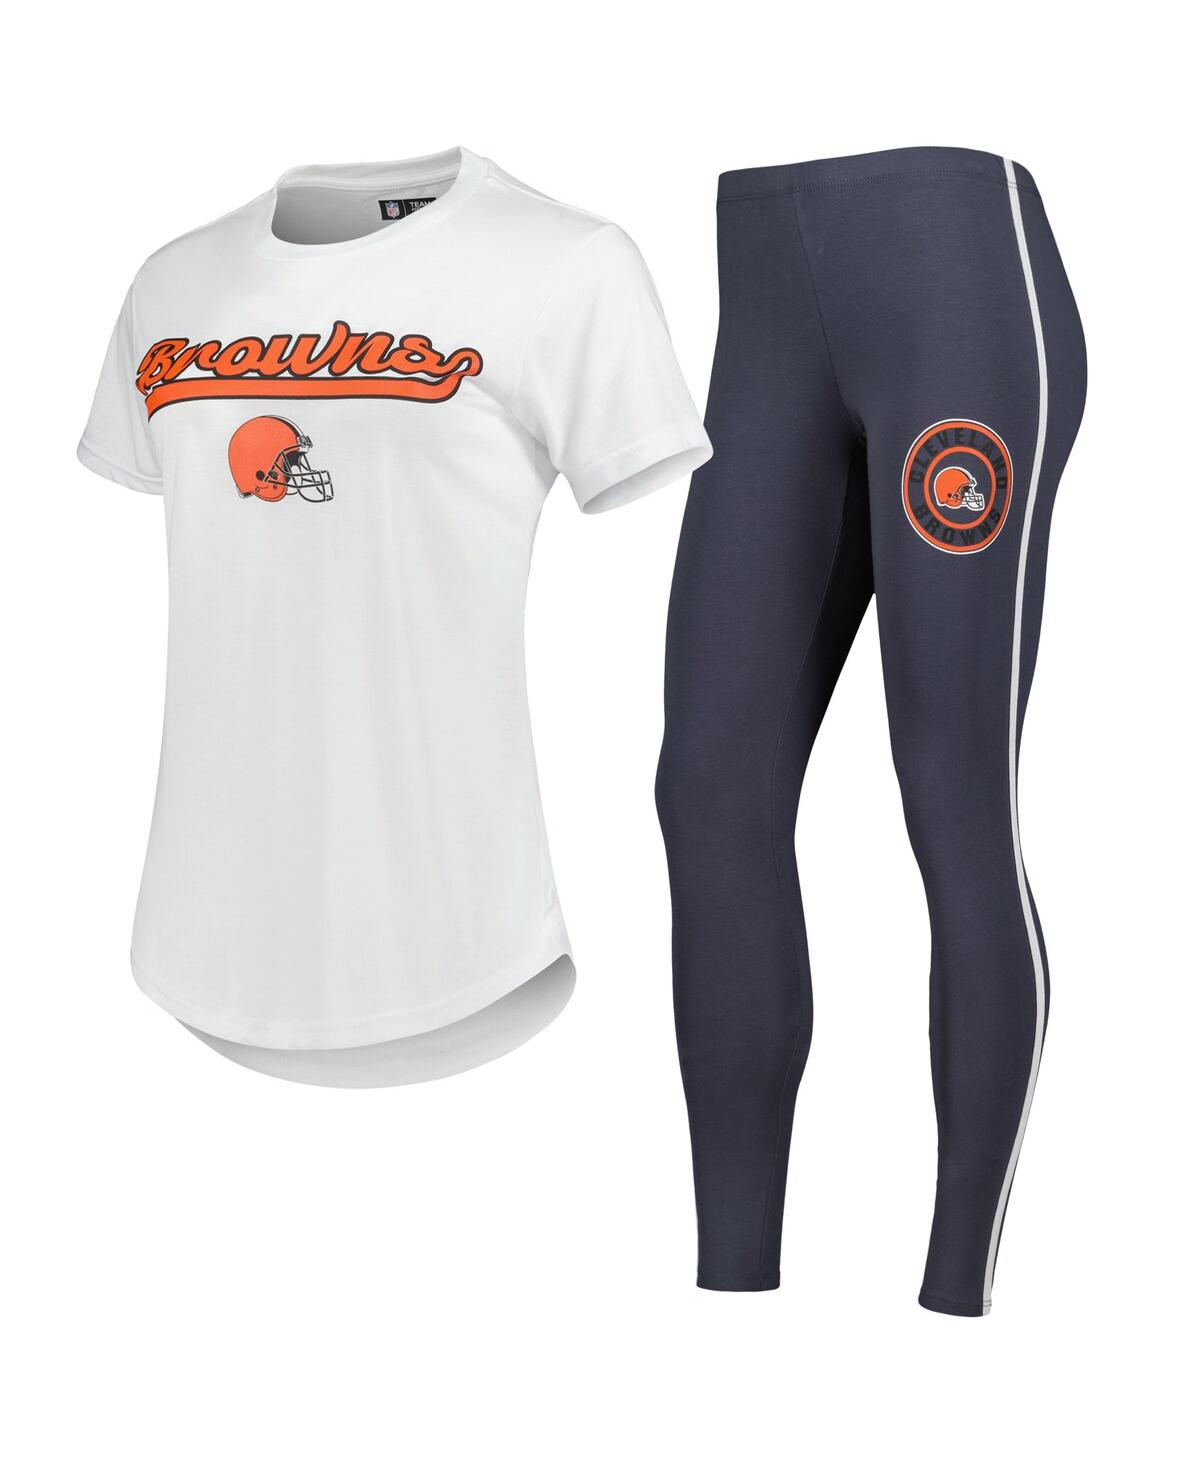 Women's Concepts Sport White, Charcoal Cleveland Browns Sonata T-shirt and Leggings Sleep Set - White, Charcoal